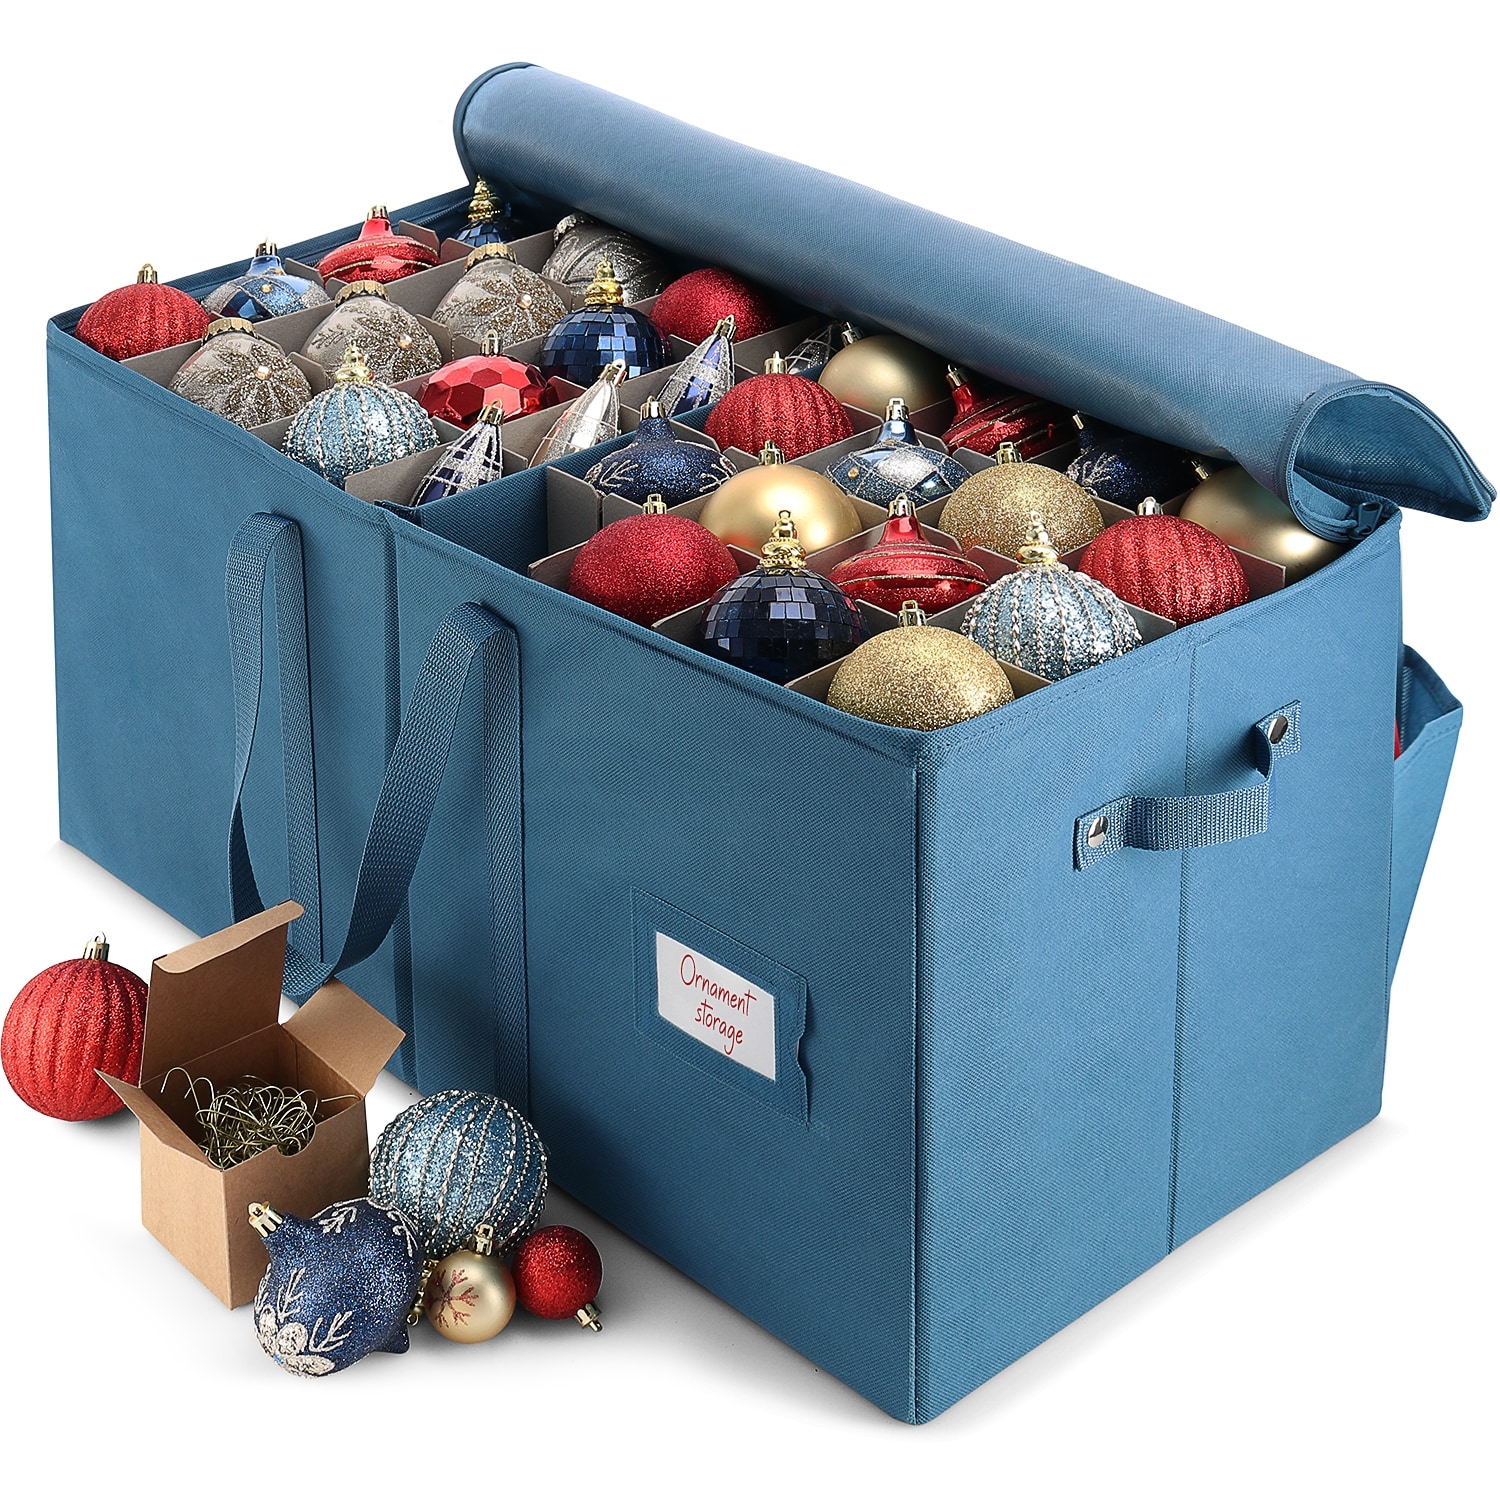 Hearth & Harbor Wrapping Paper Storage Container, Christmas Storage Bag  with Interior Pockets - Fits Up to 22 Rolls of 40, Tear proof Gift Wrap  Storage Organizer, Underbed Storage 